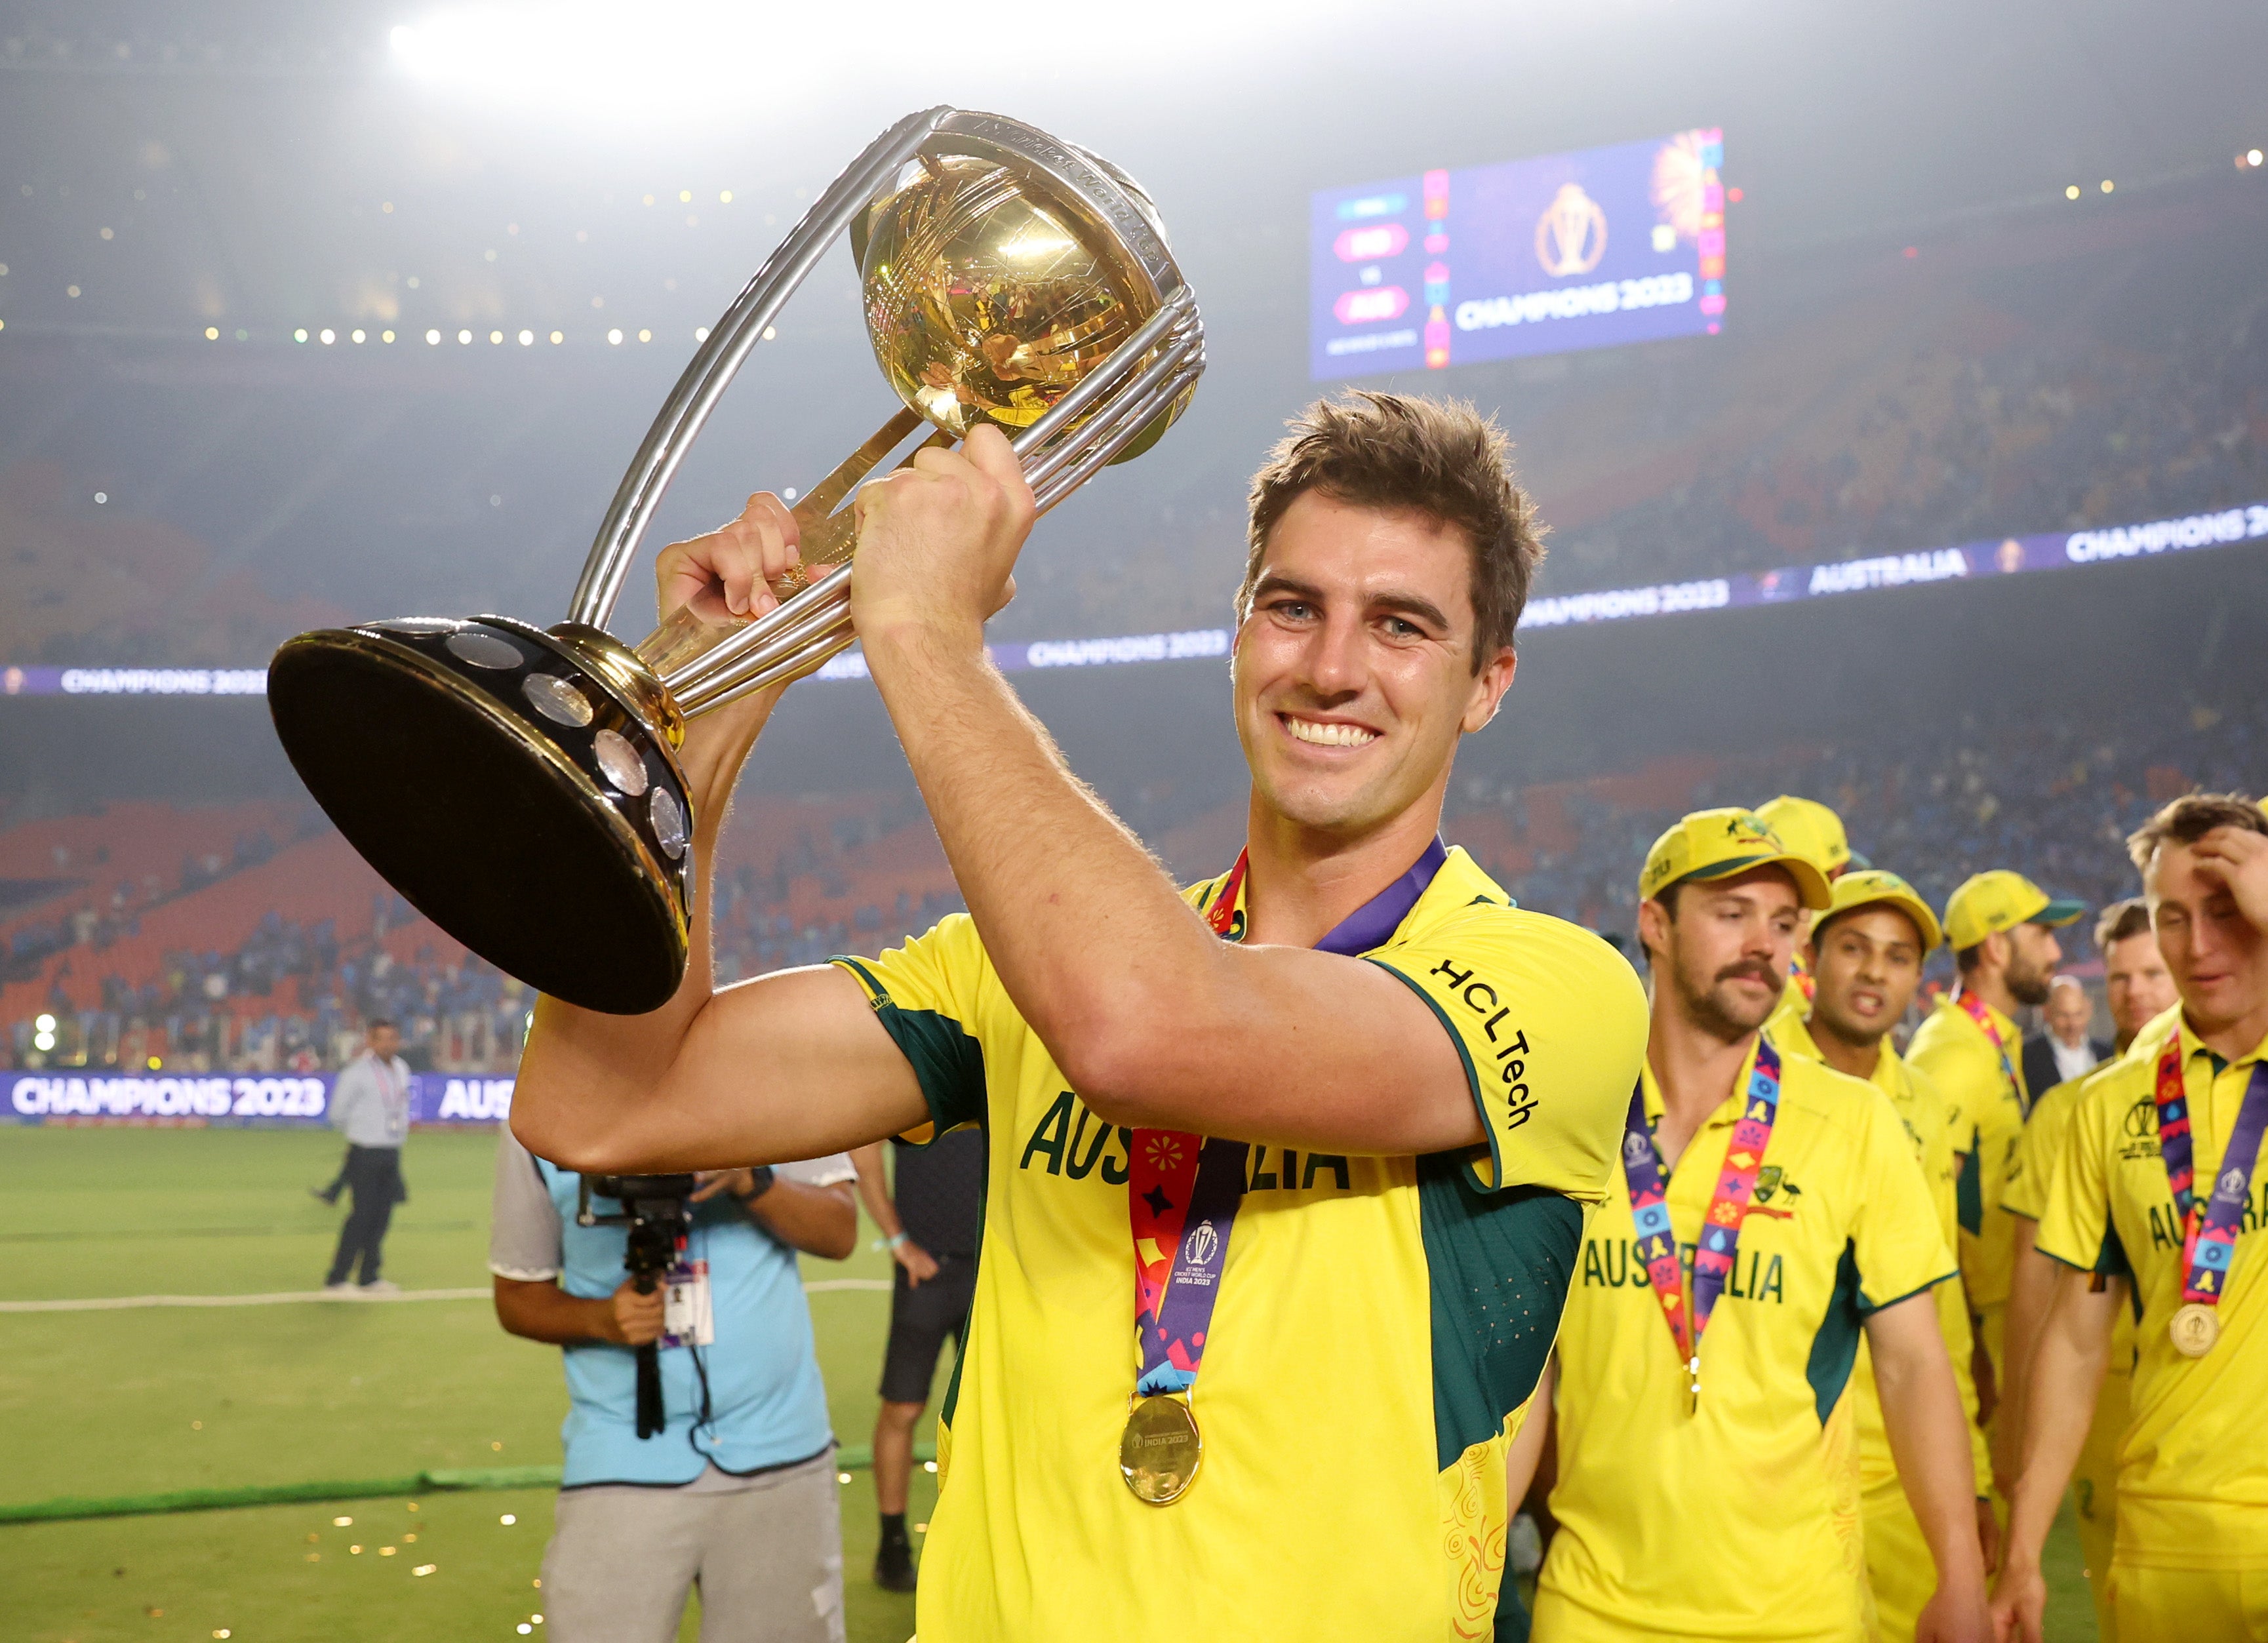 mitchell starc signs for world record price at ipl auction as harry brook joins delhi capitals